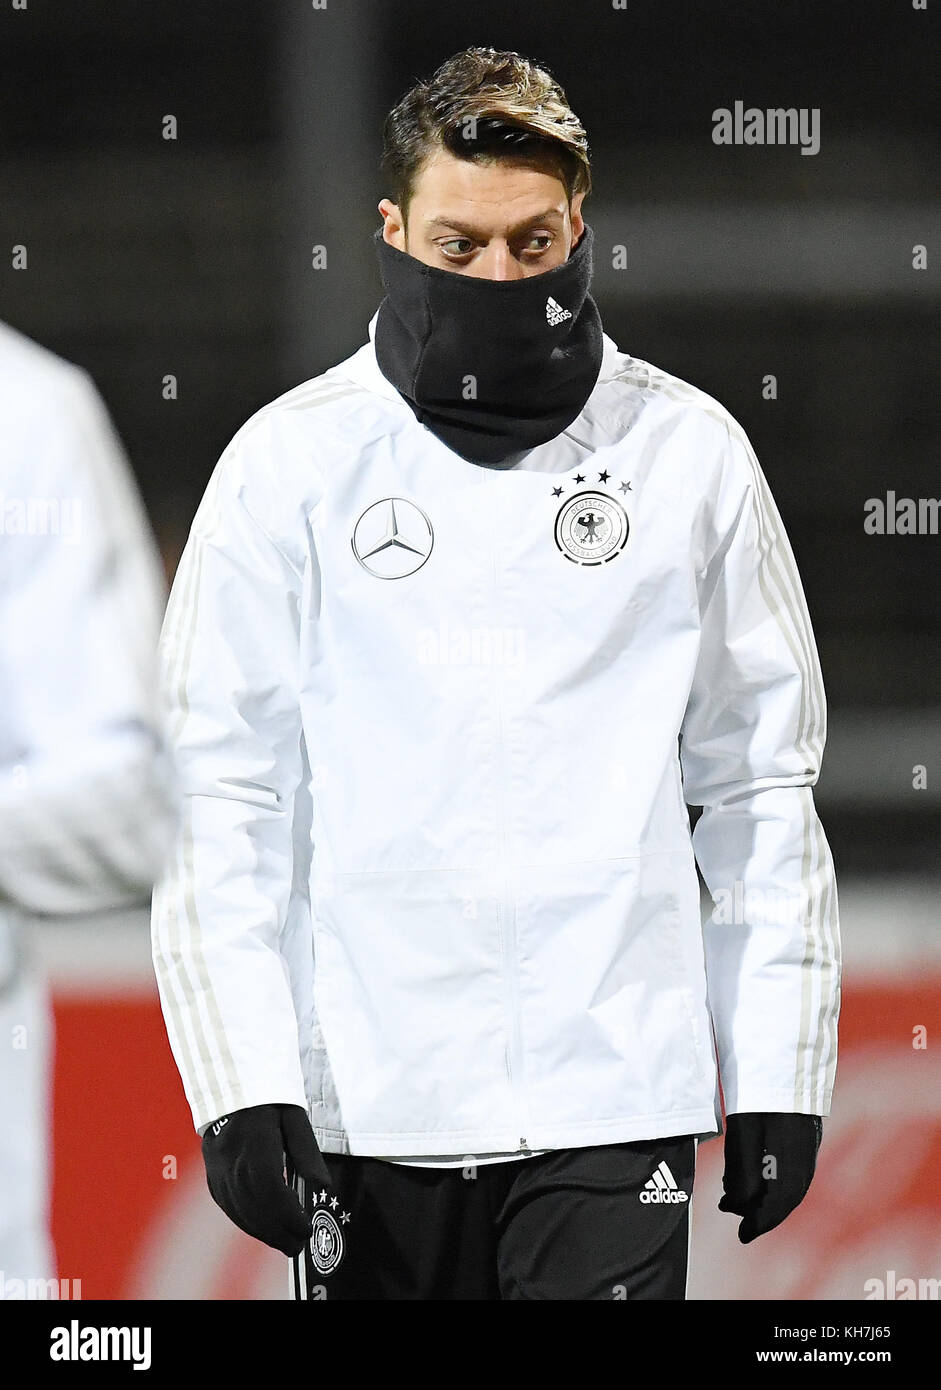 Mesut Oezil (Germany) with Schal versus die Kaelte. GES/ Fussball/ DFB- Training, Koeln, 13.11.2017 Football / Soccer: Training / prcactice of the  german national team, Cologne, November 13, 2017 |usage worldwide Stock  Photo - Alamy